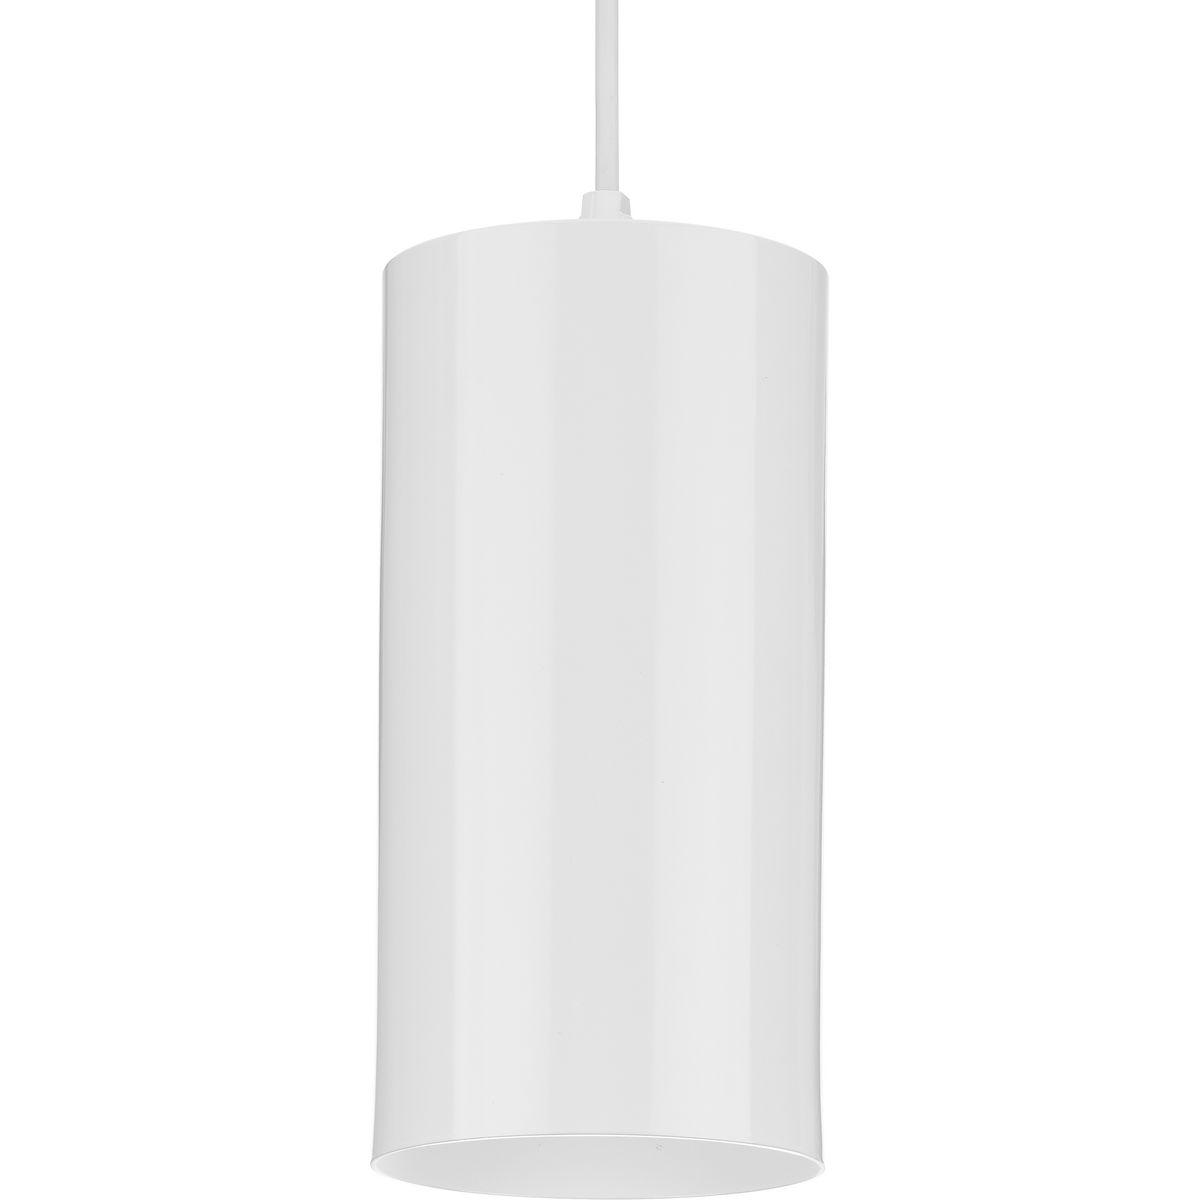 Hubbell P500356-030 Embrace a clean modern design with the Cylinder Collection 6-Inch 1-Light White Modern Outdoor Hanging Pendant Light. The sleek cylinder shade is coated in a crisp white finish. A field-cuttable cord provides flexibility in application, make it suitable f